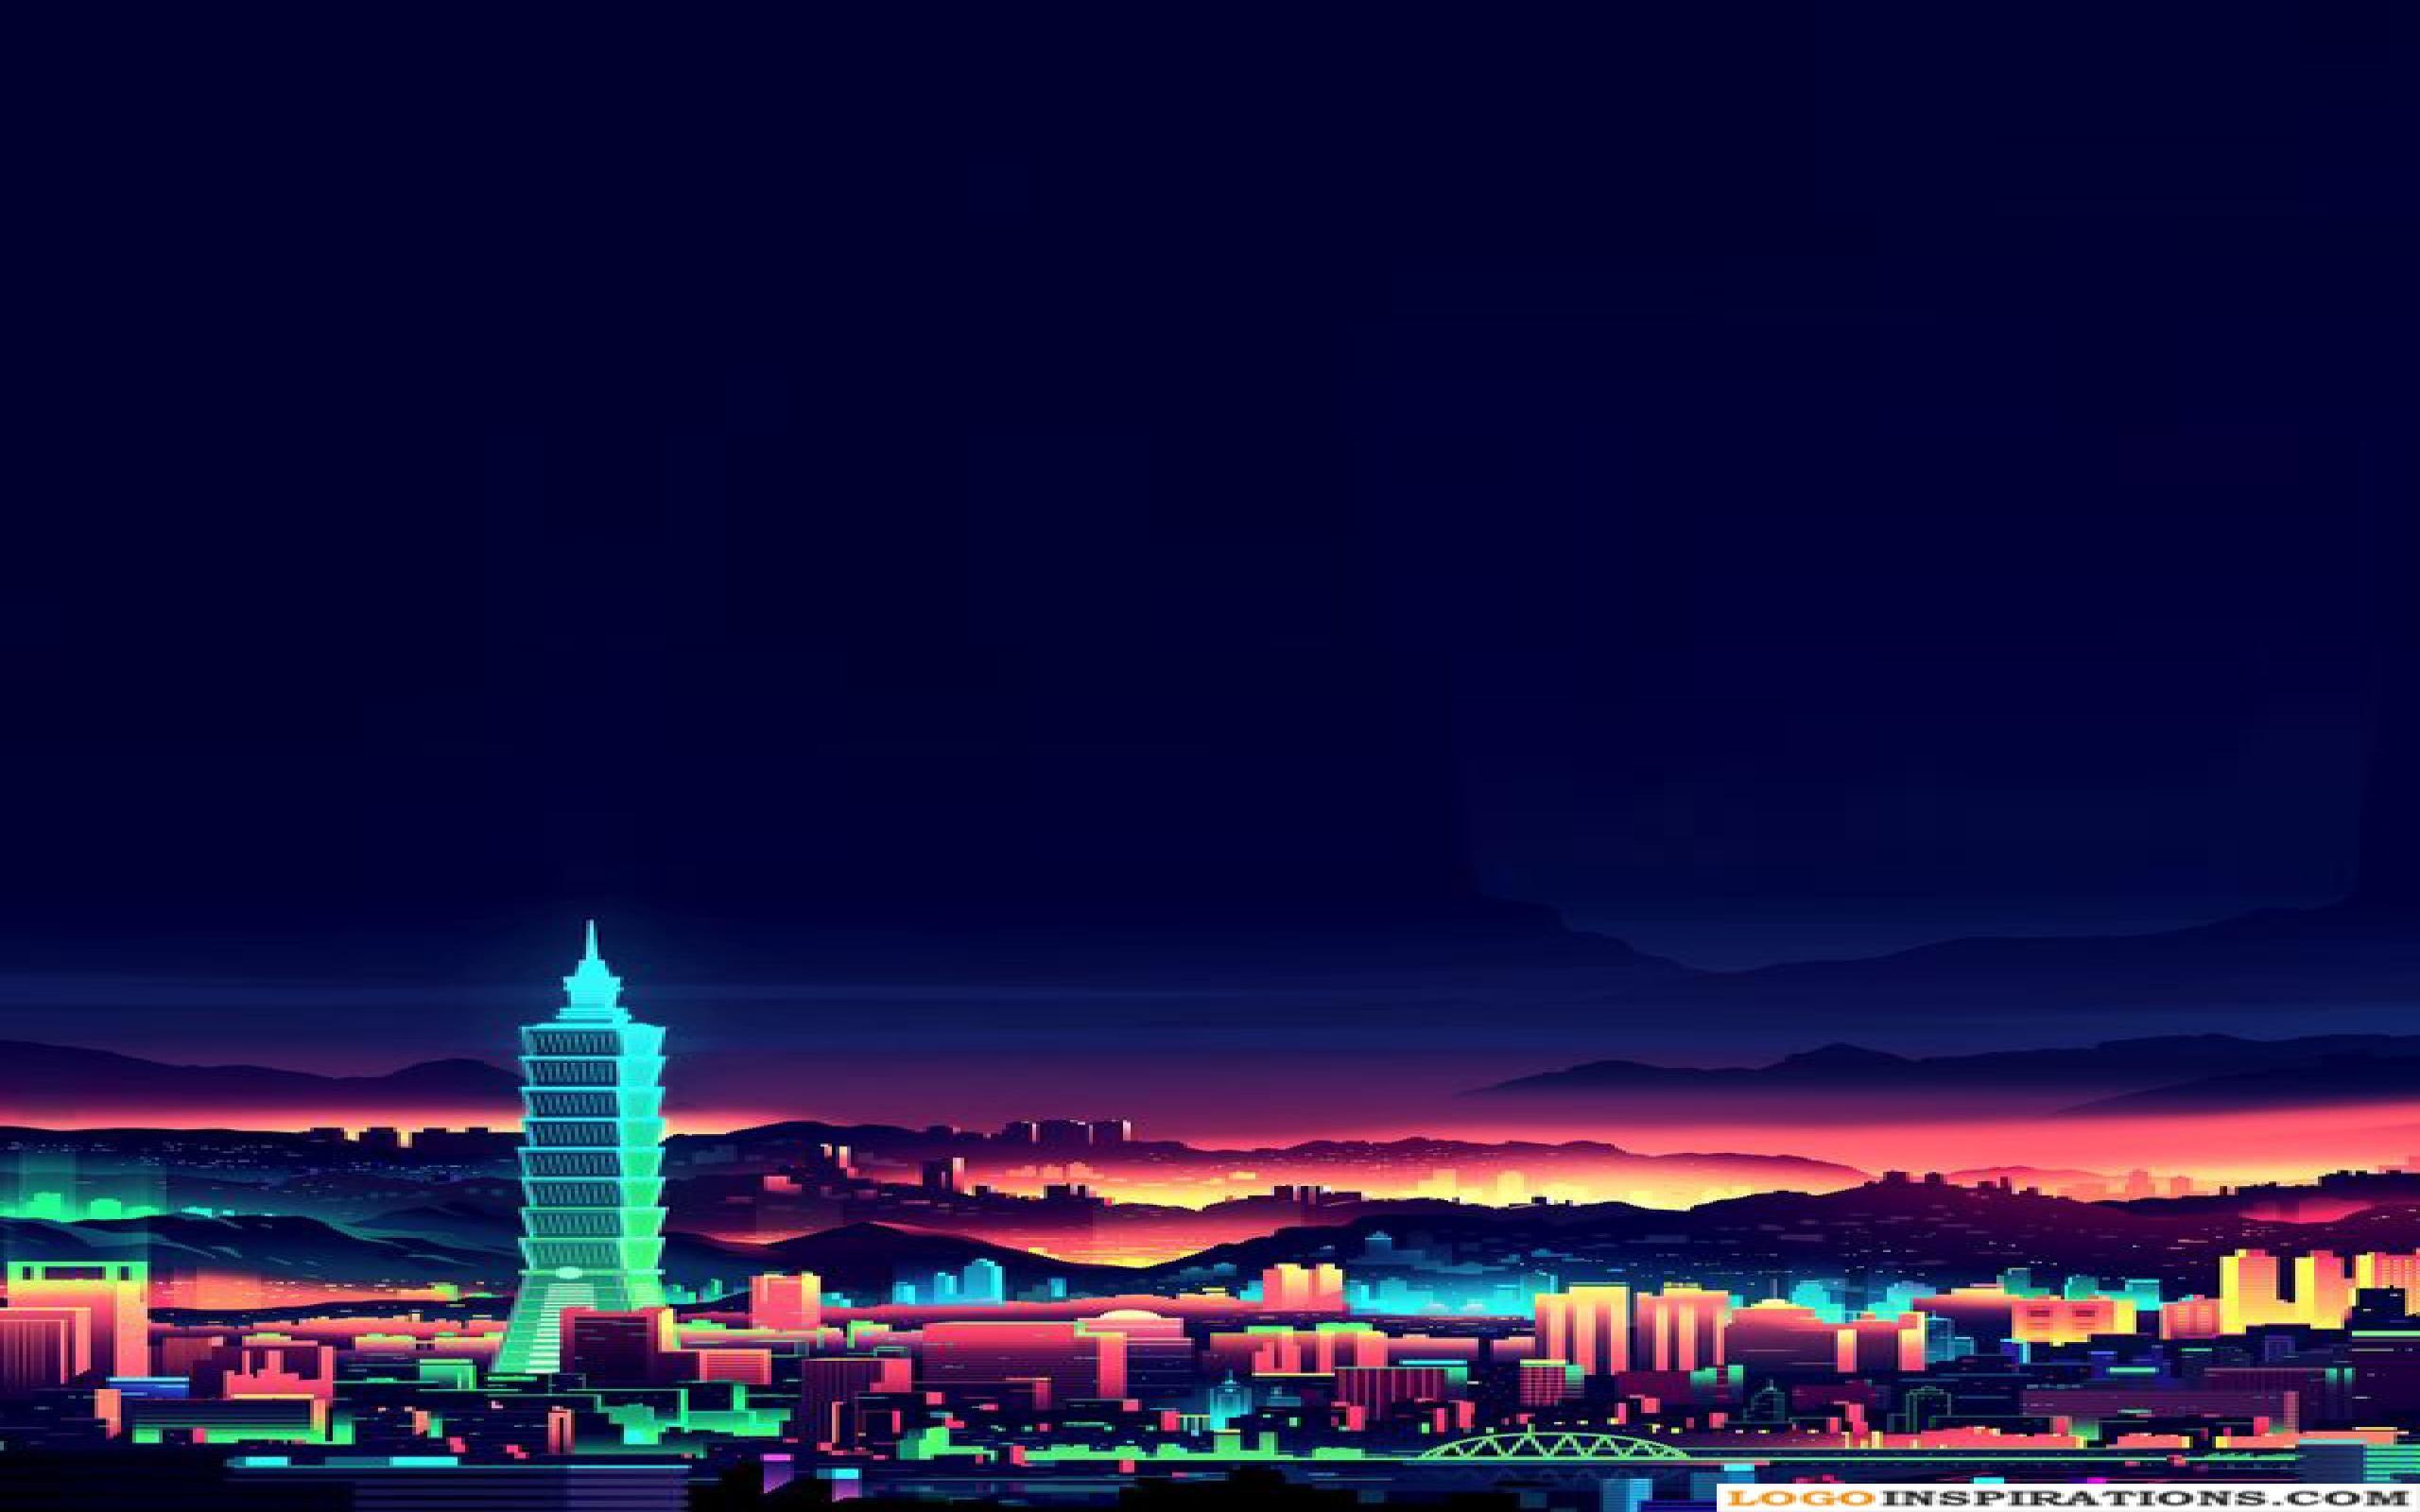 Pixel Art Wallpaper and HD Background free download on PicGaGa